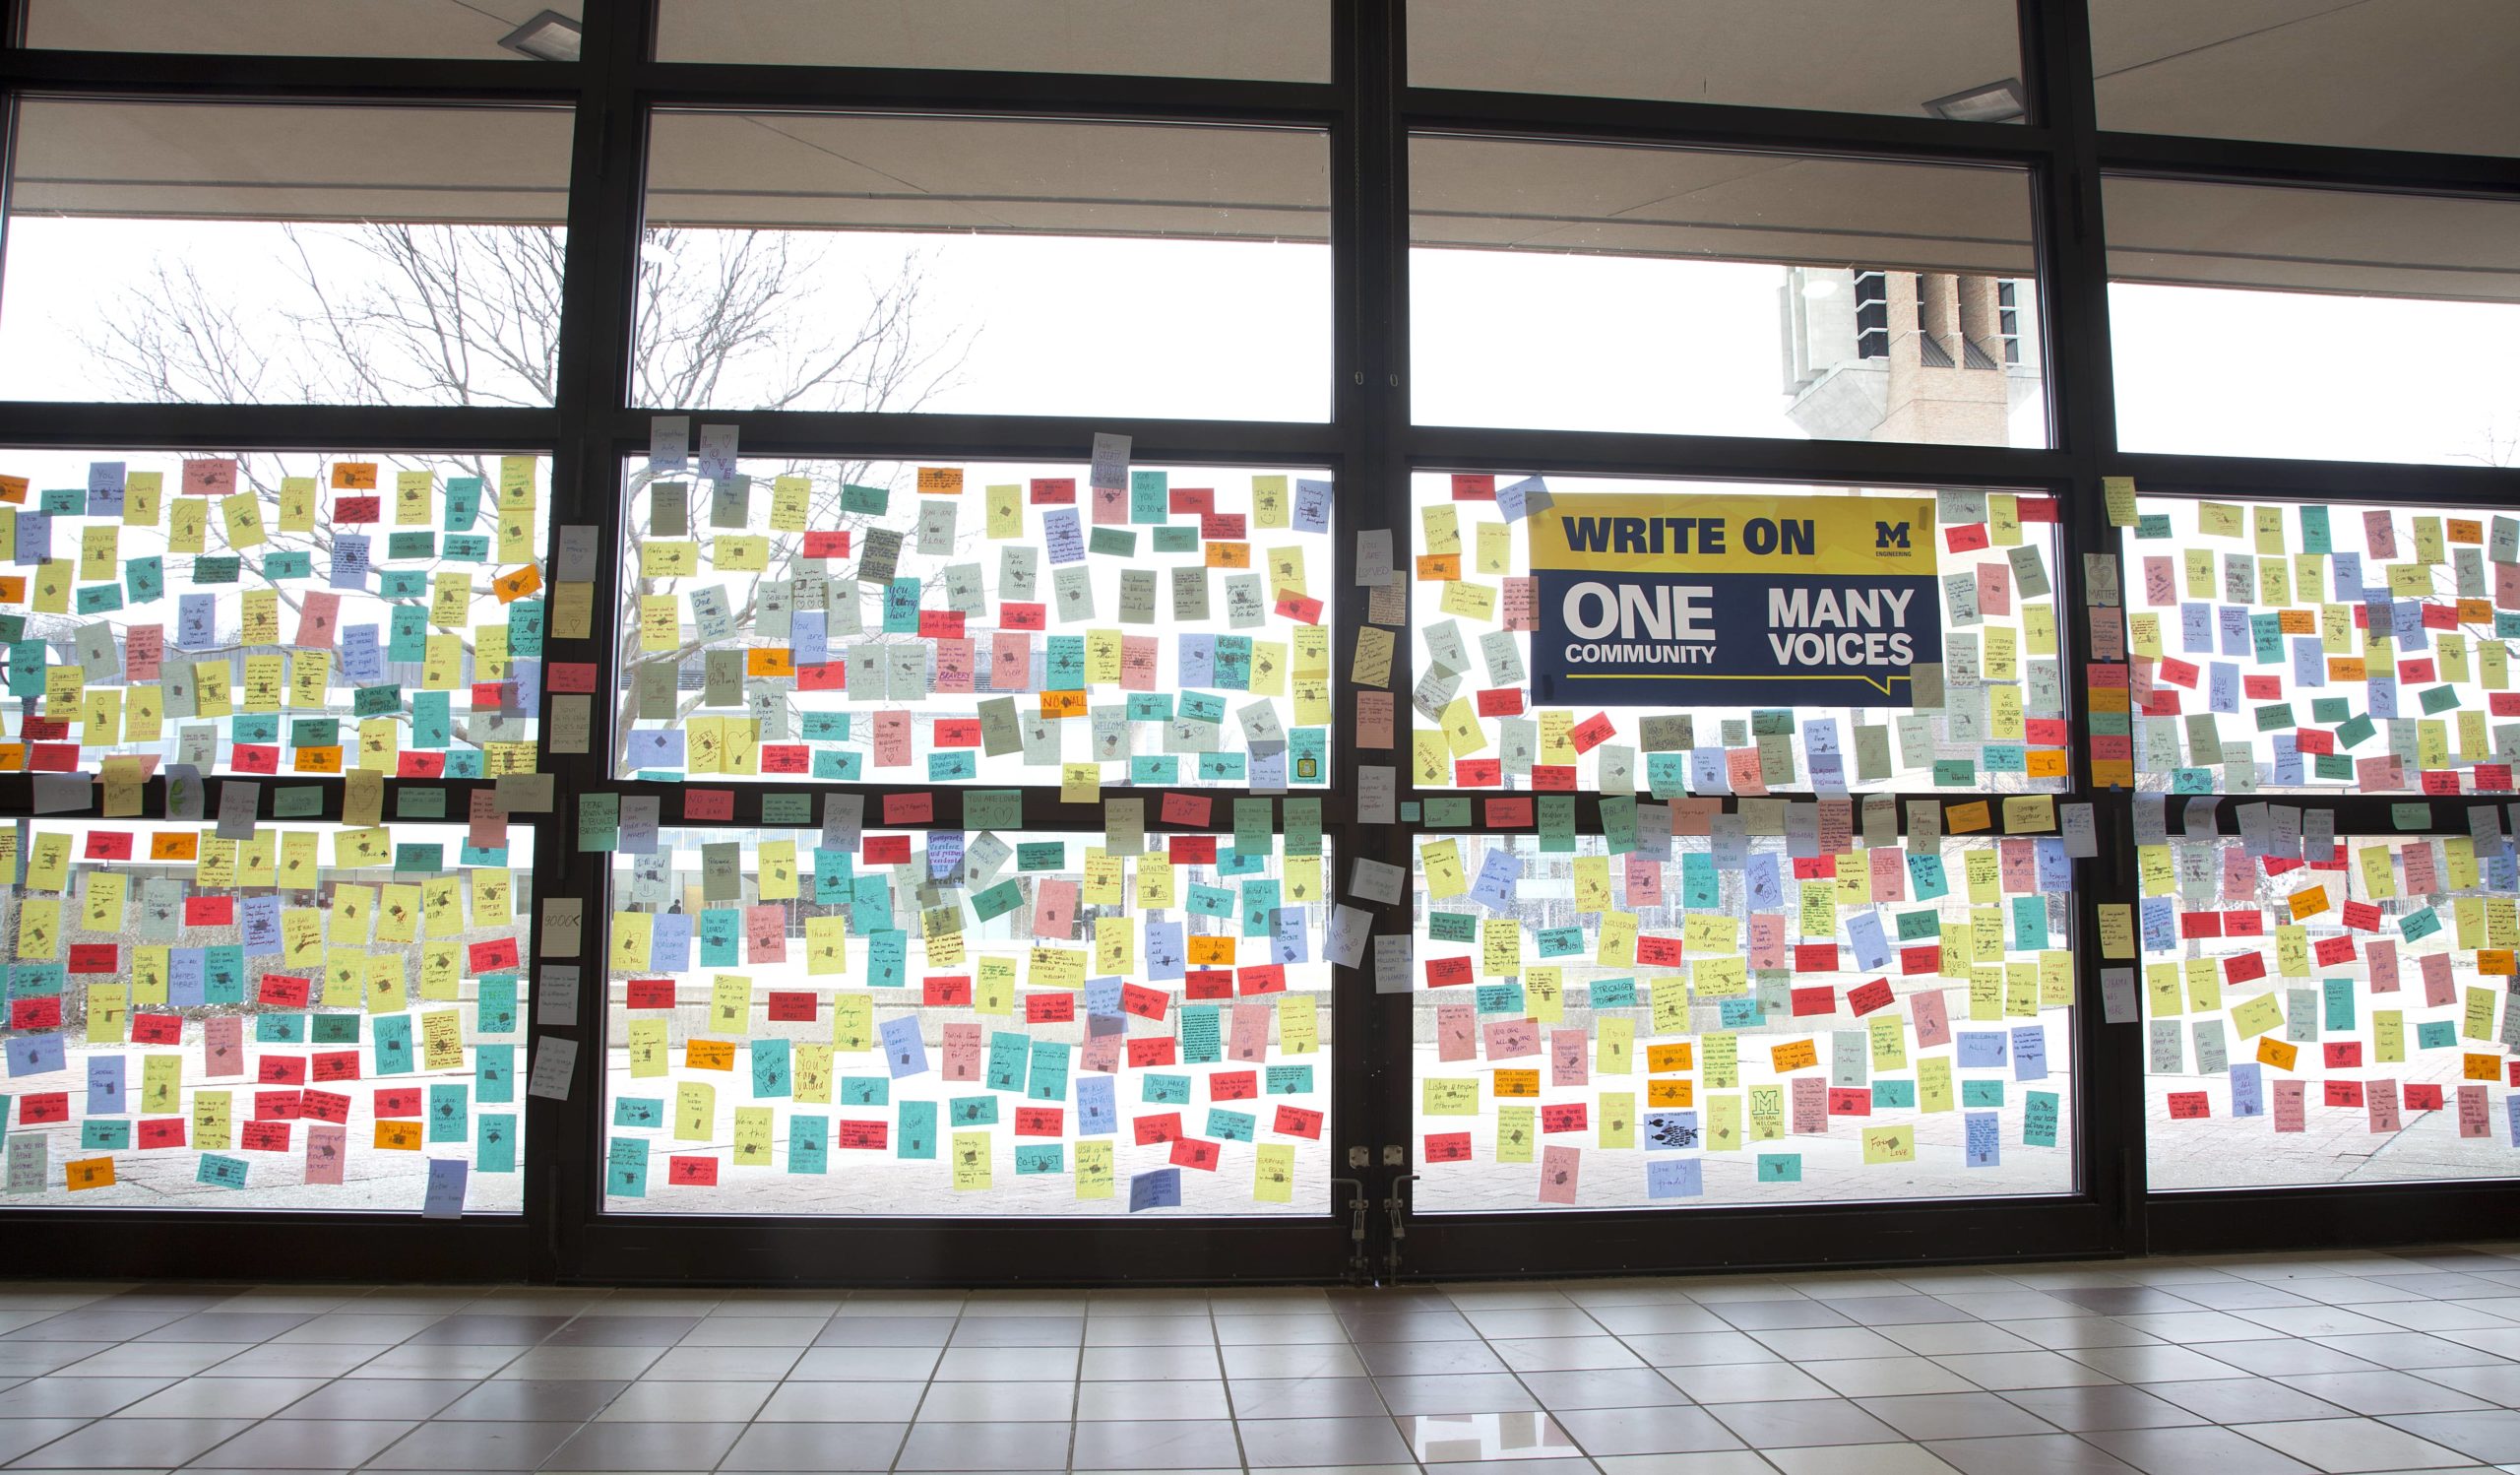 Post-its written on by many students as part of an equity initiative